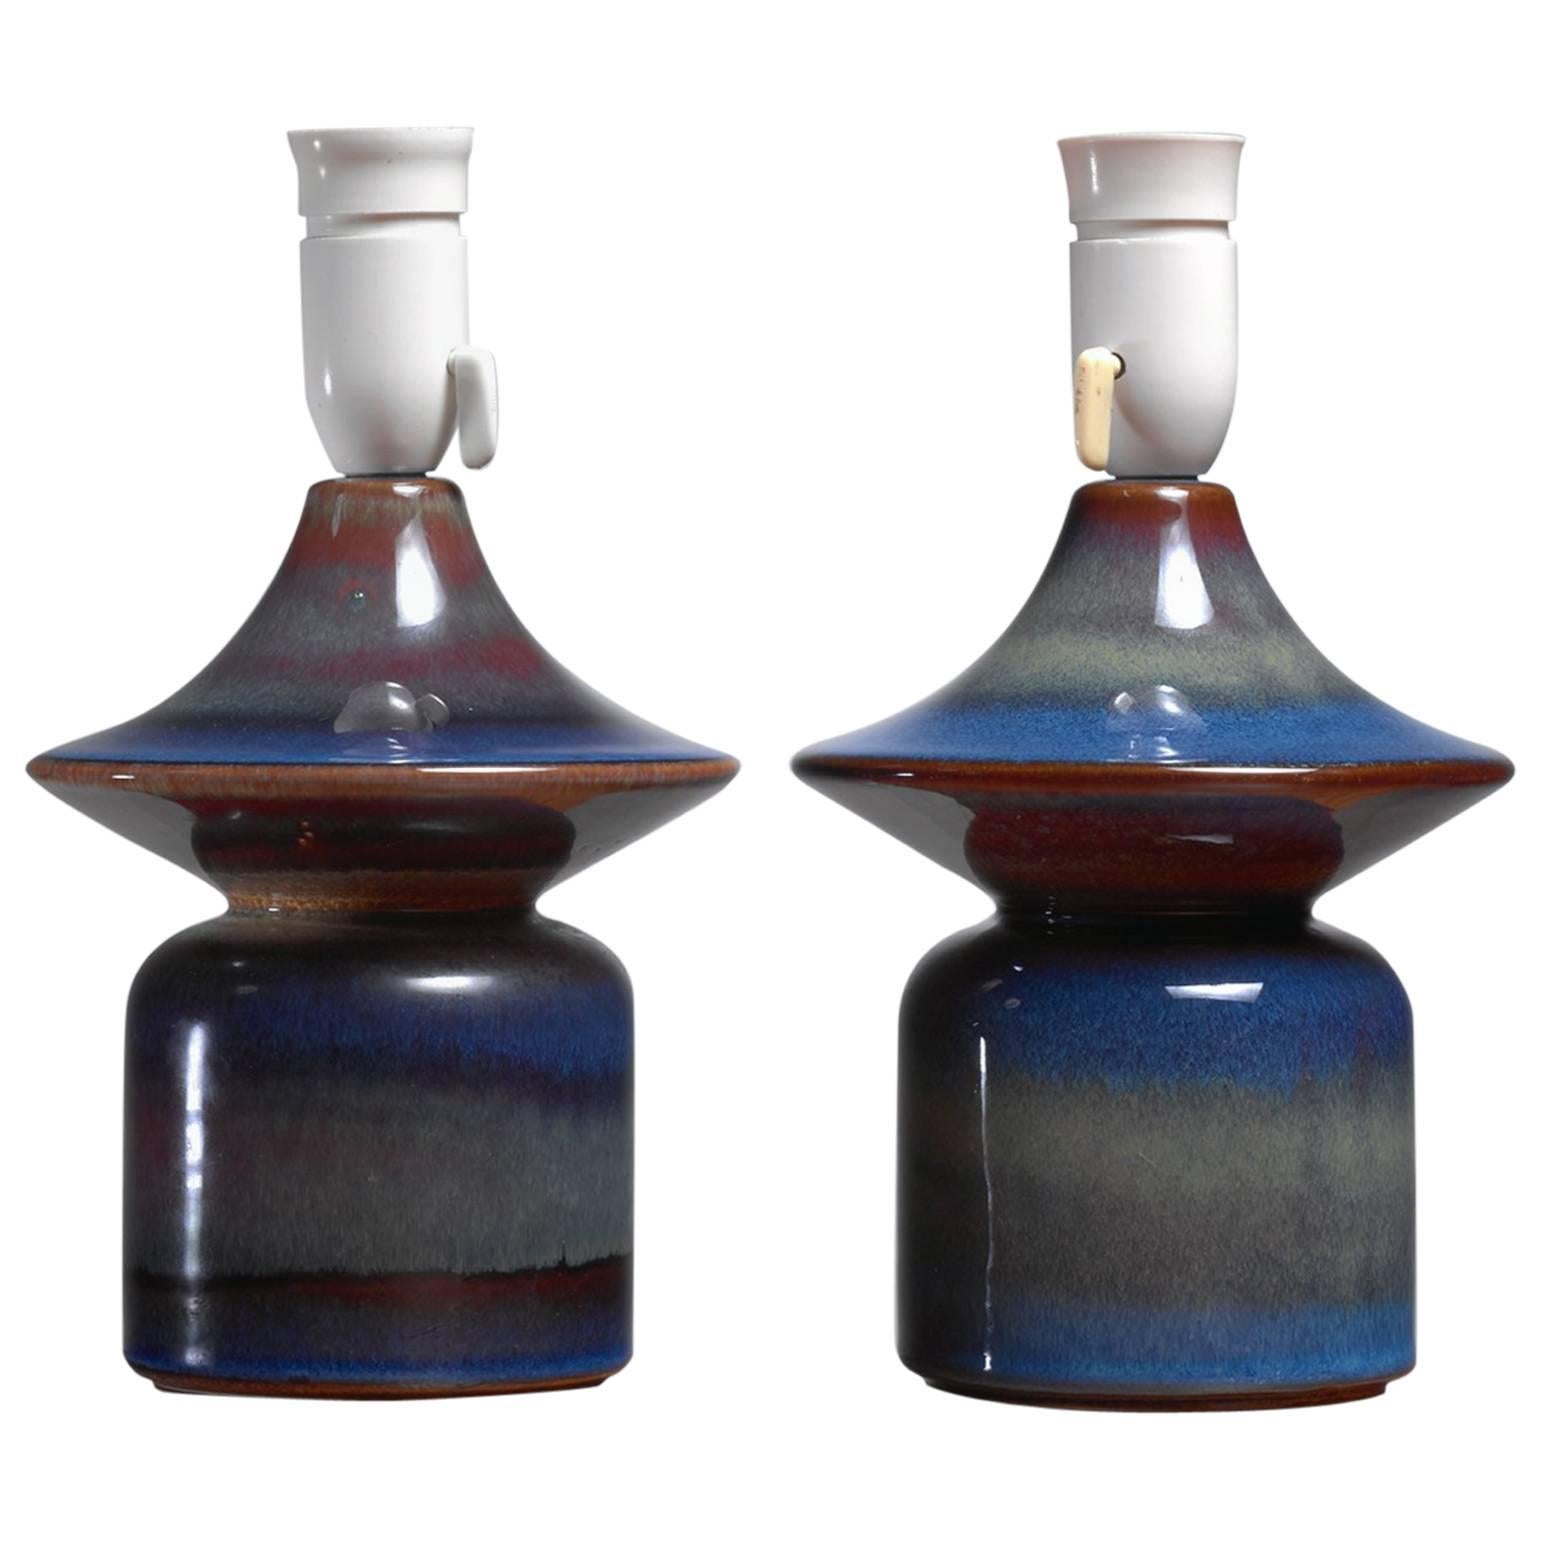 Pair of Blue Ceramic Table Lamps by Soholm, Denmark, 1960s